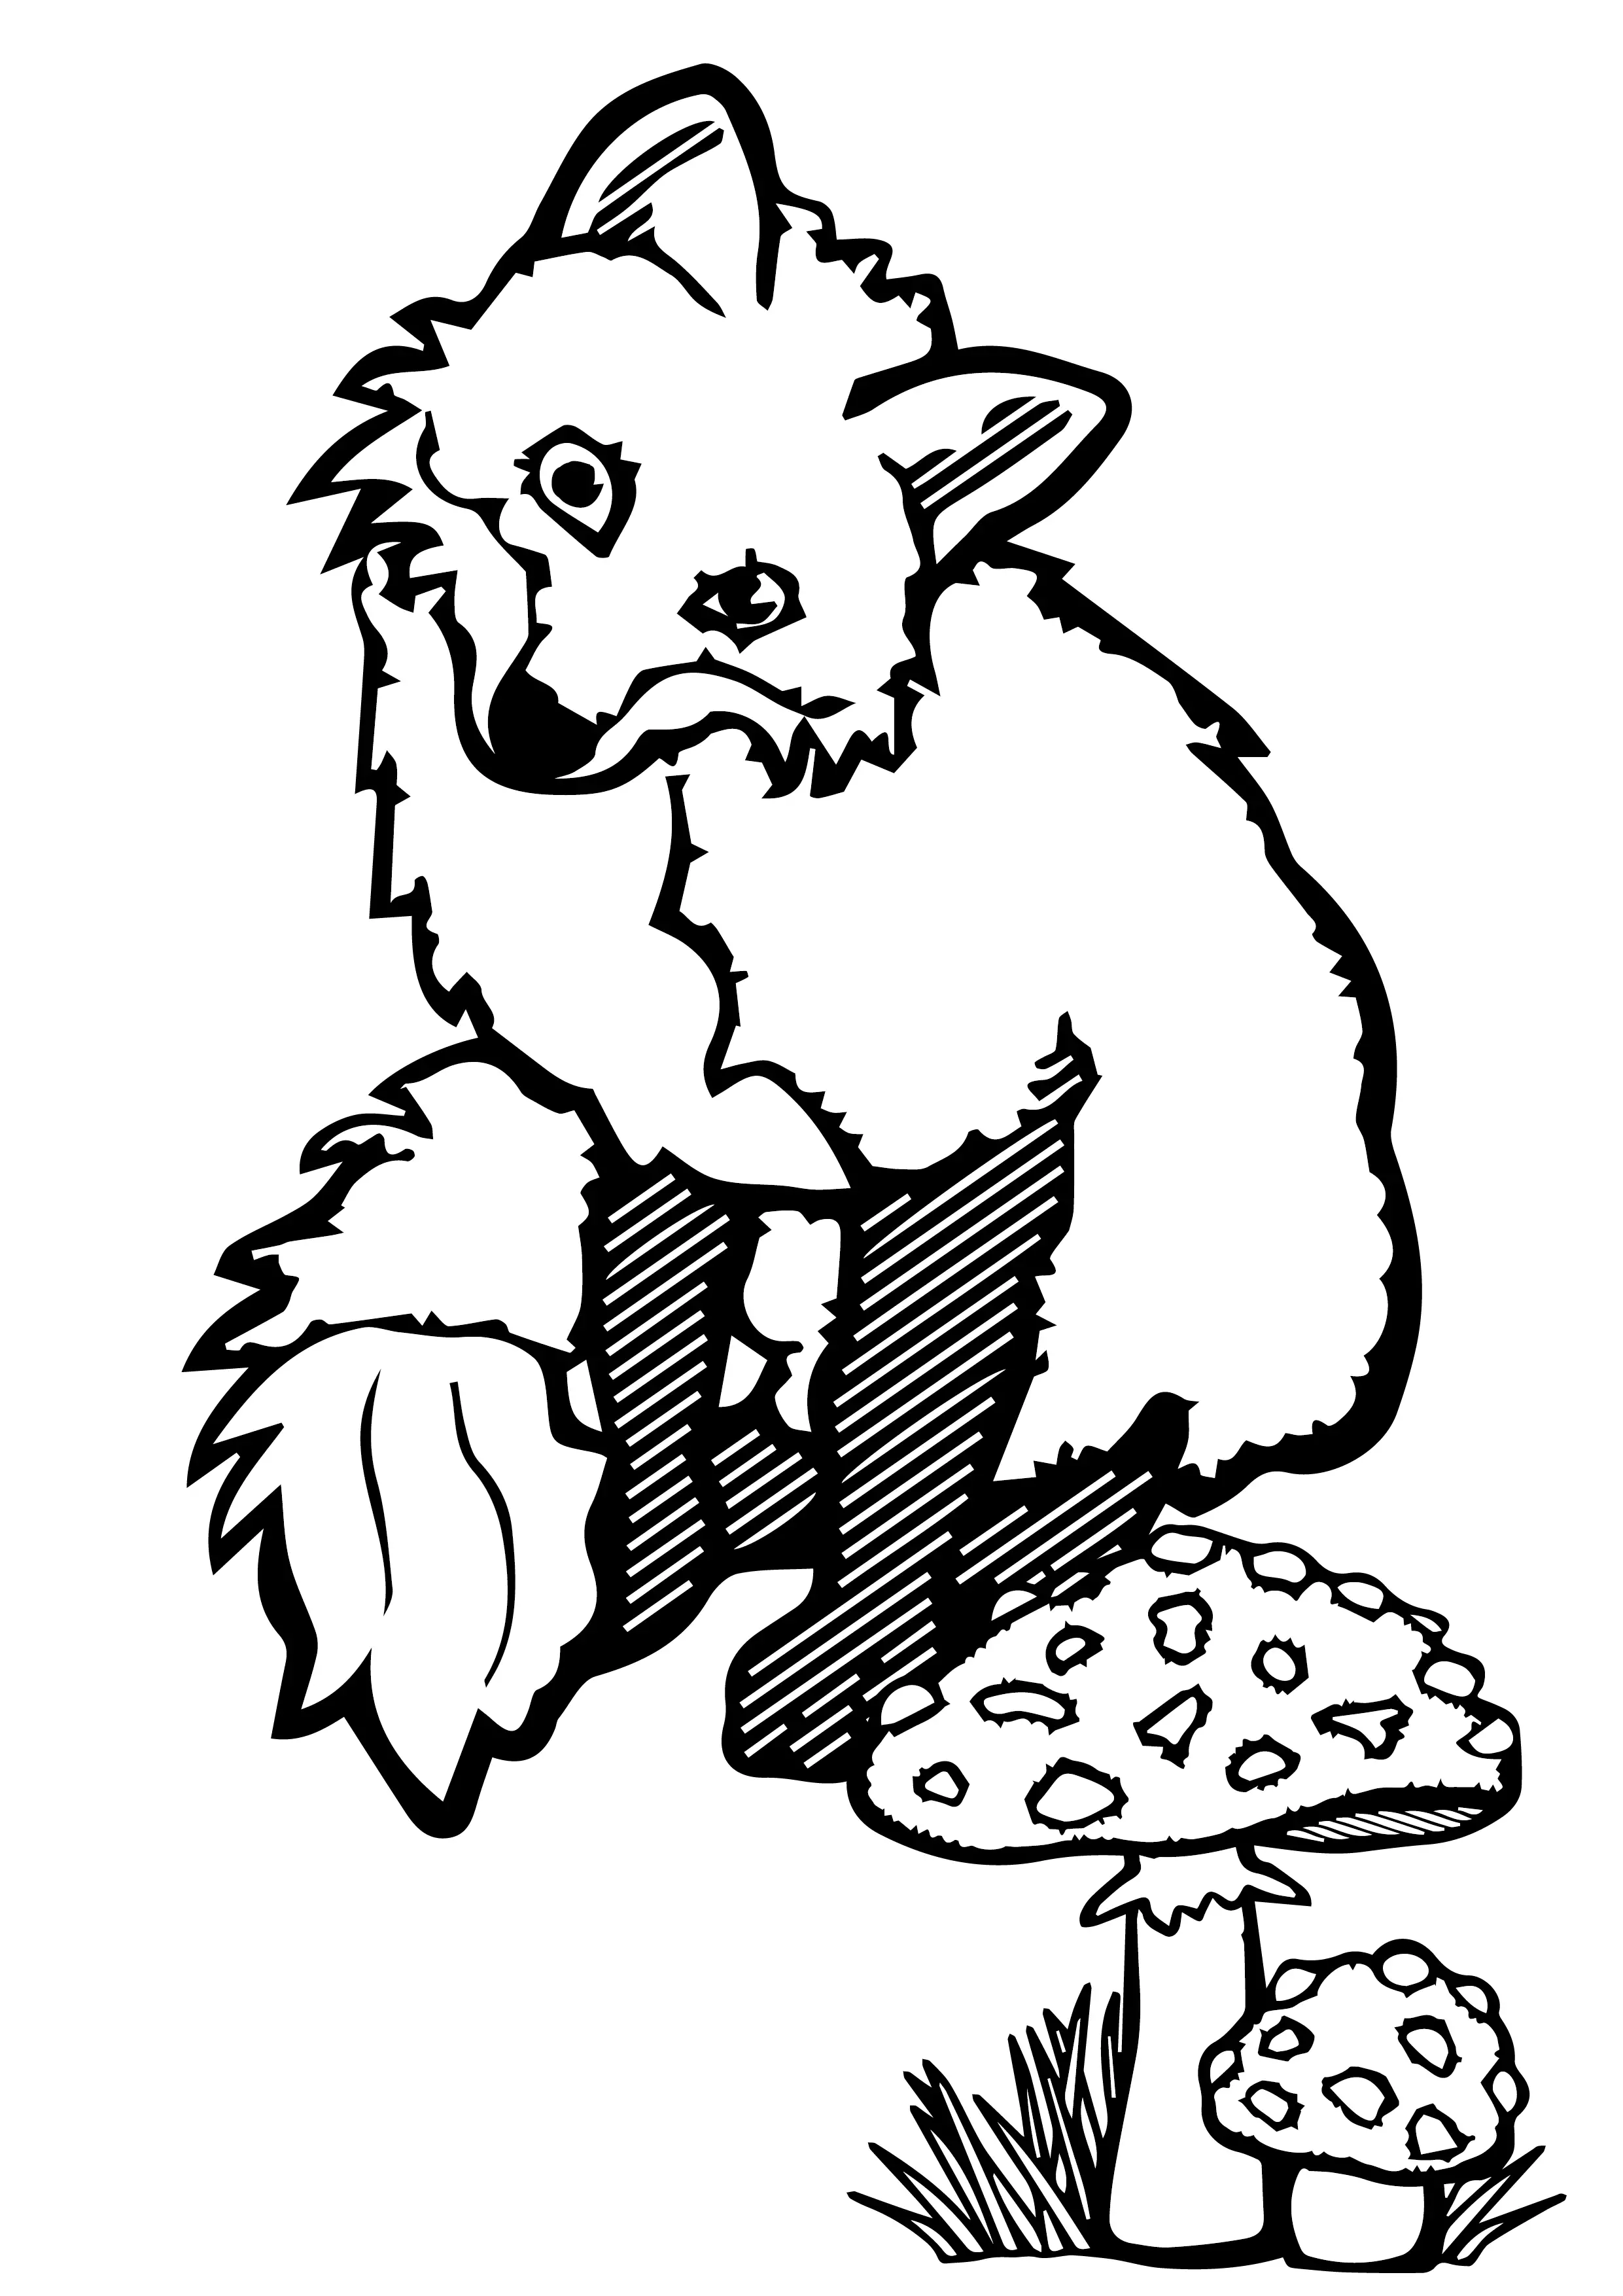 Fox Looking at Mushroom-Cartoon-Free-Clipart-Line-Drawing-coloring-page-Activity-For-Kids-02